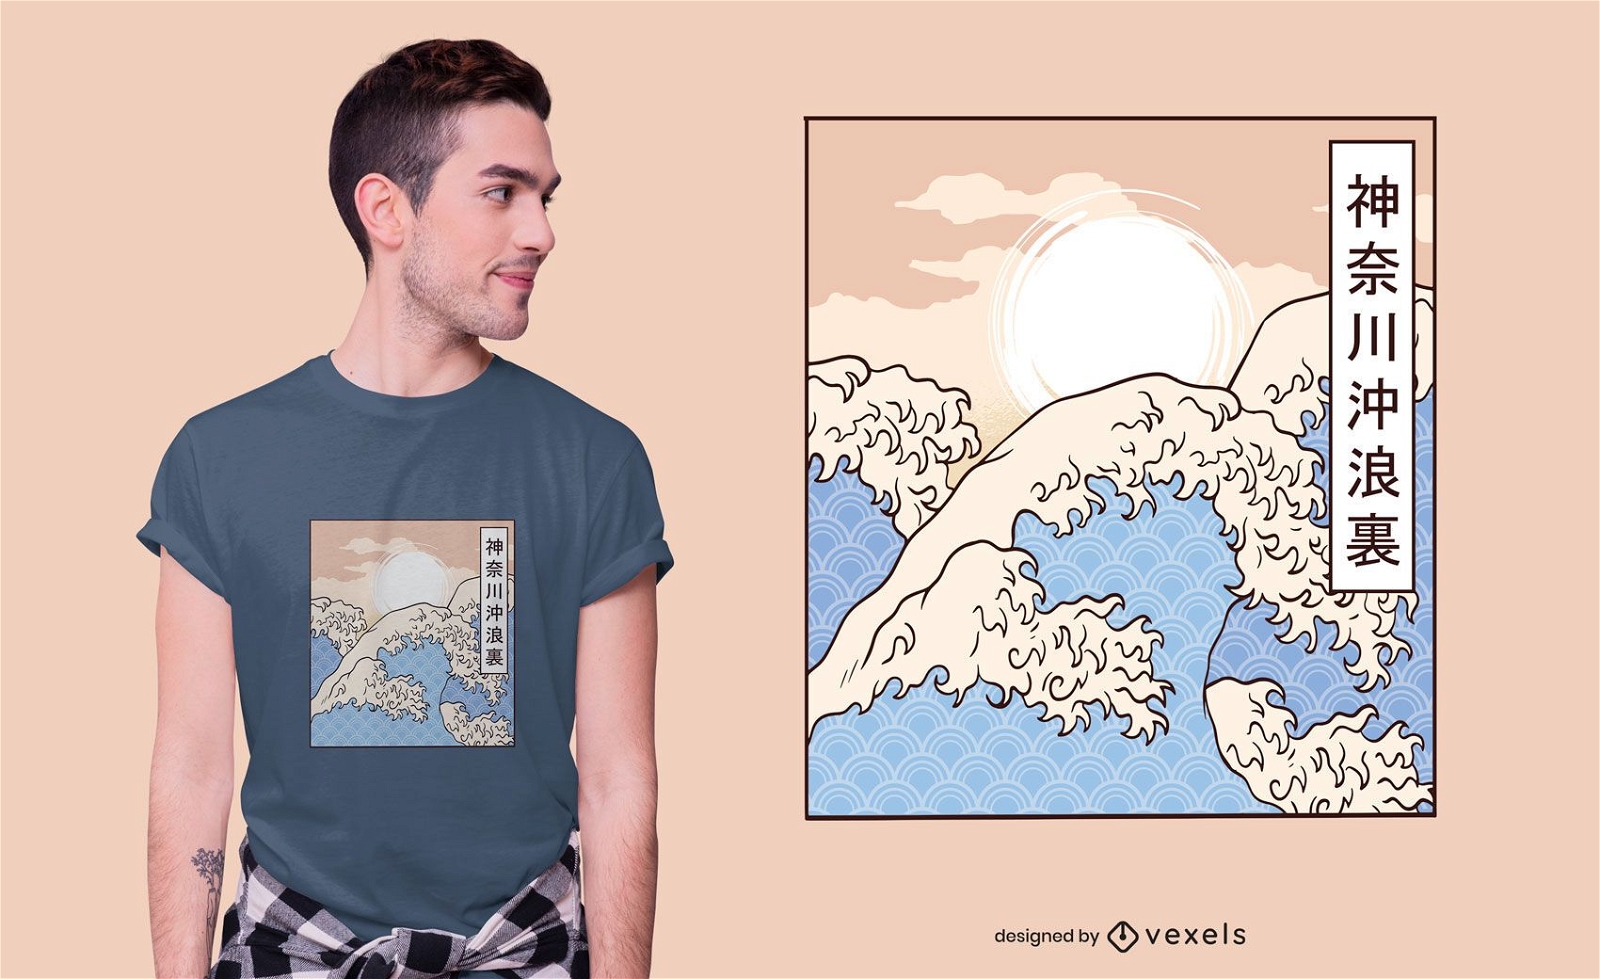 The great wave t-shirt design